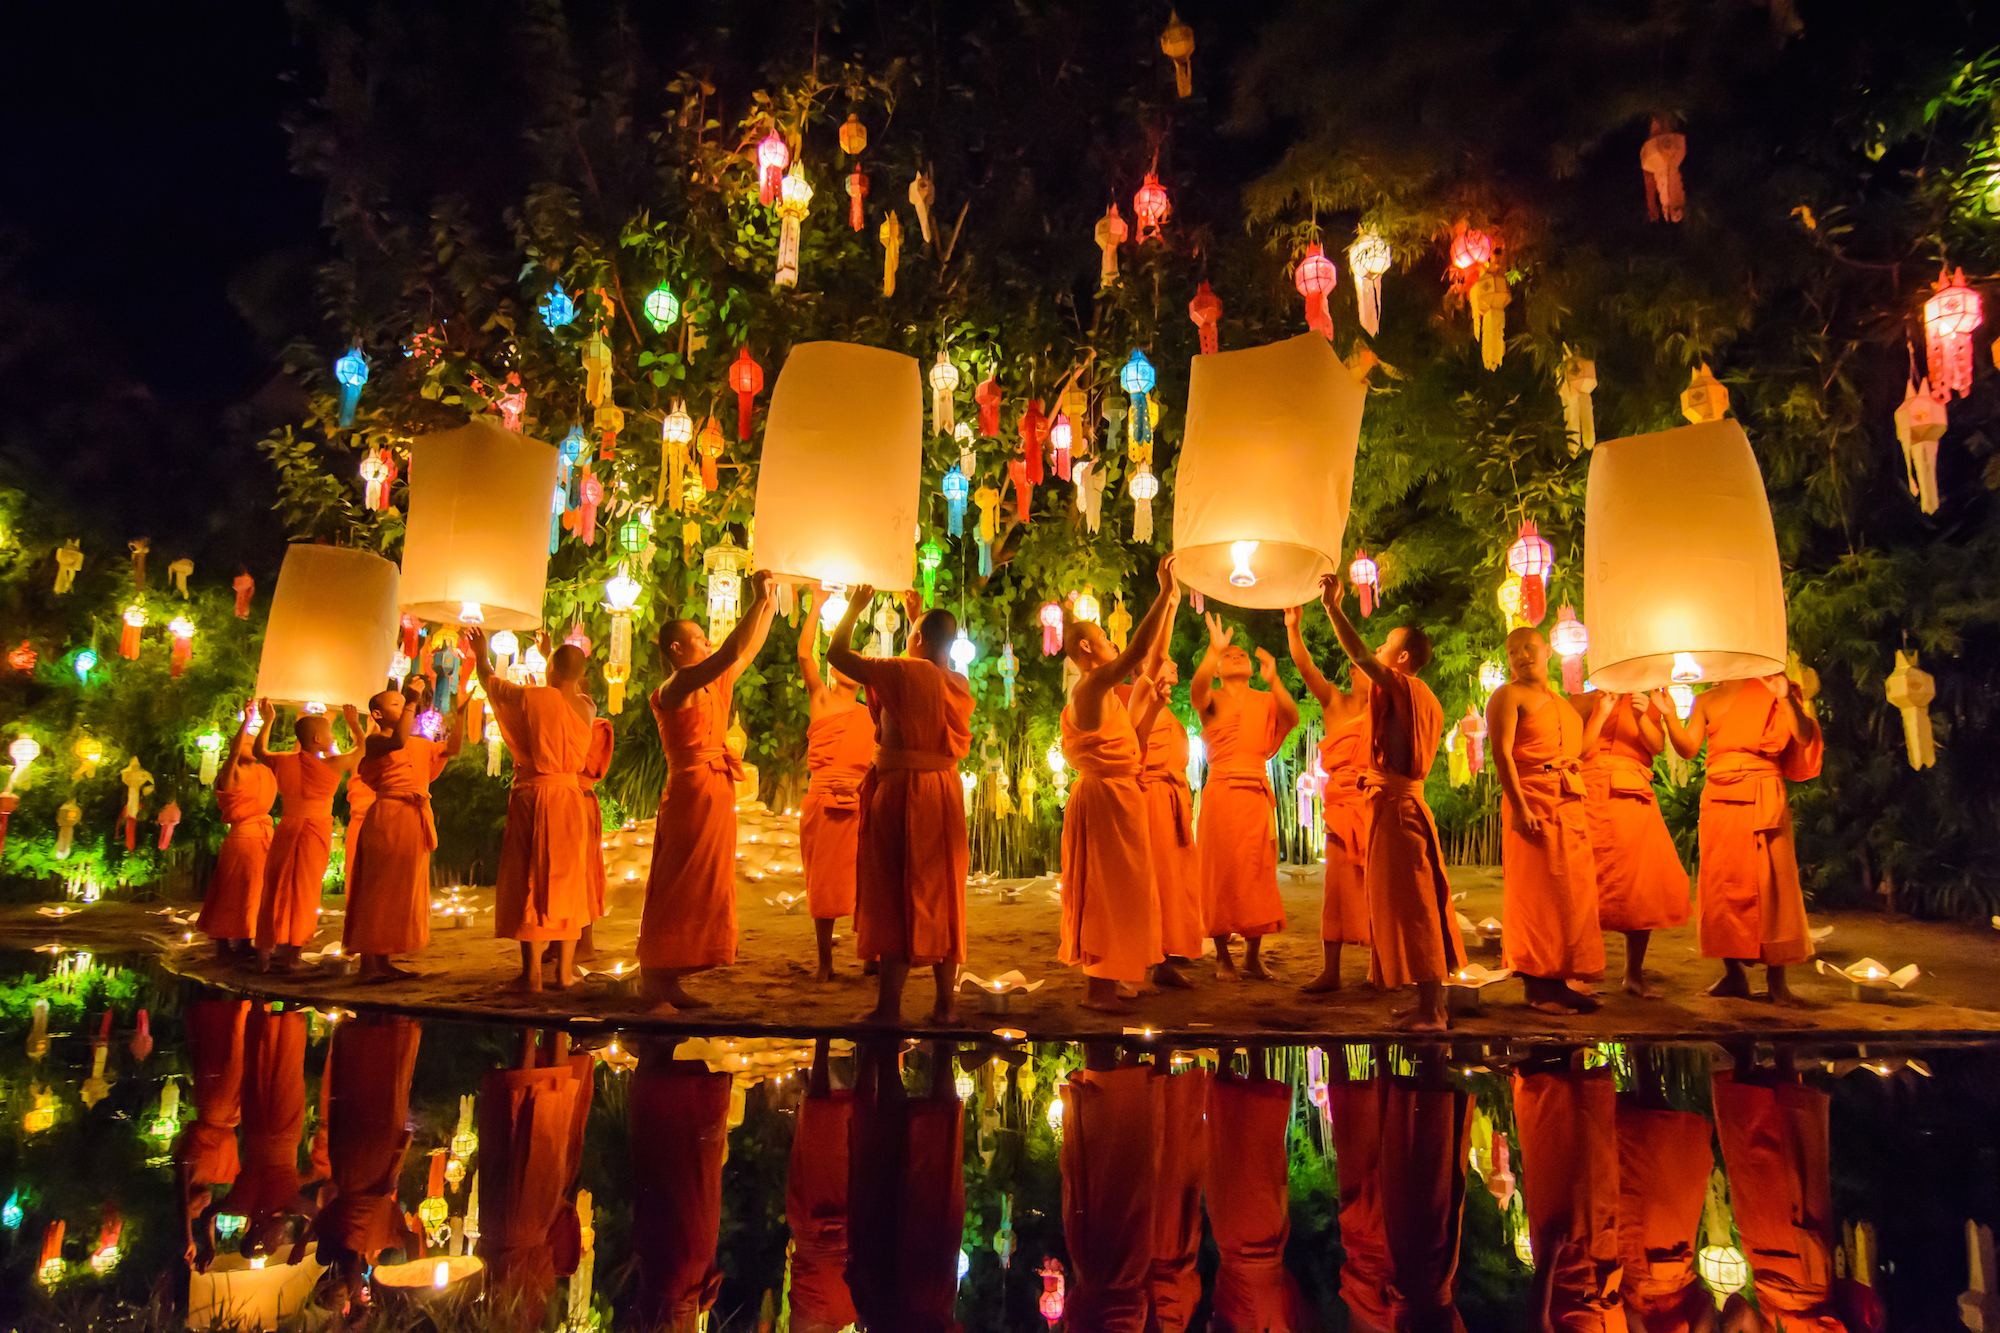 Loi Krathong celebrations, which coincide with the Yi Peng Festival in northern Thailand, take place more broadly across Thailand.